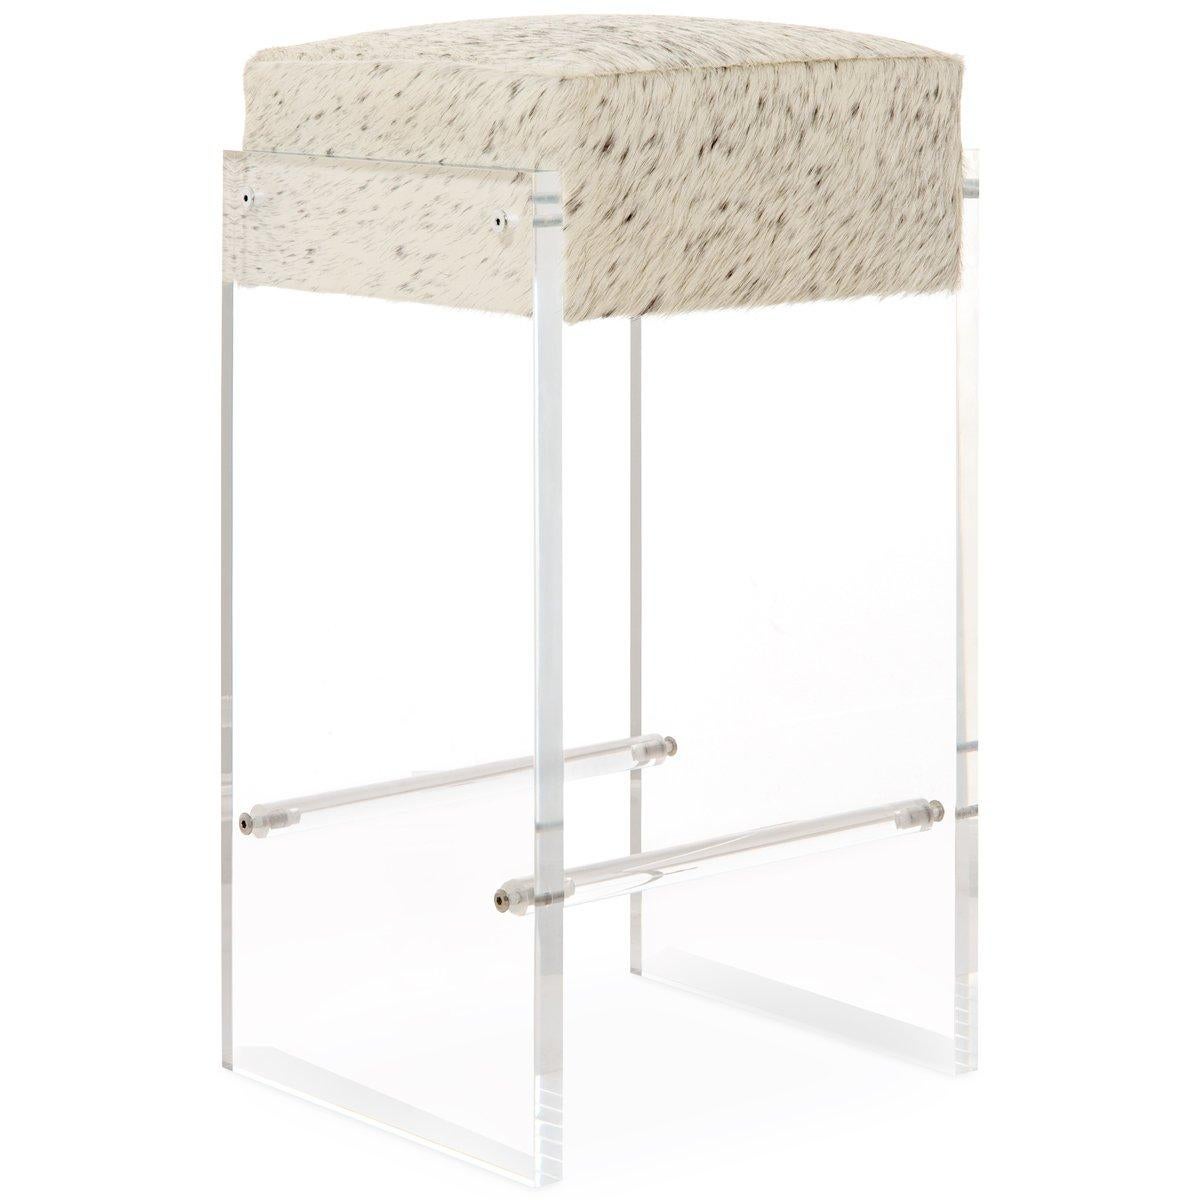 Simple, yet elegant square barstools with Lucite plinth legs, chrome metal toe kick and genuine hair-on-cowhide upholstery are perfect for any chic kitchen or bar area.